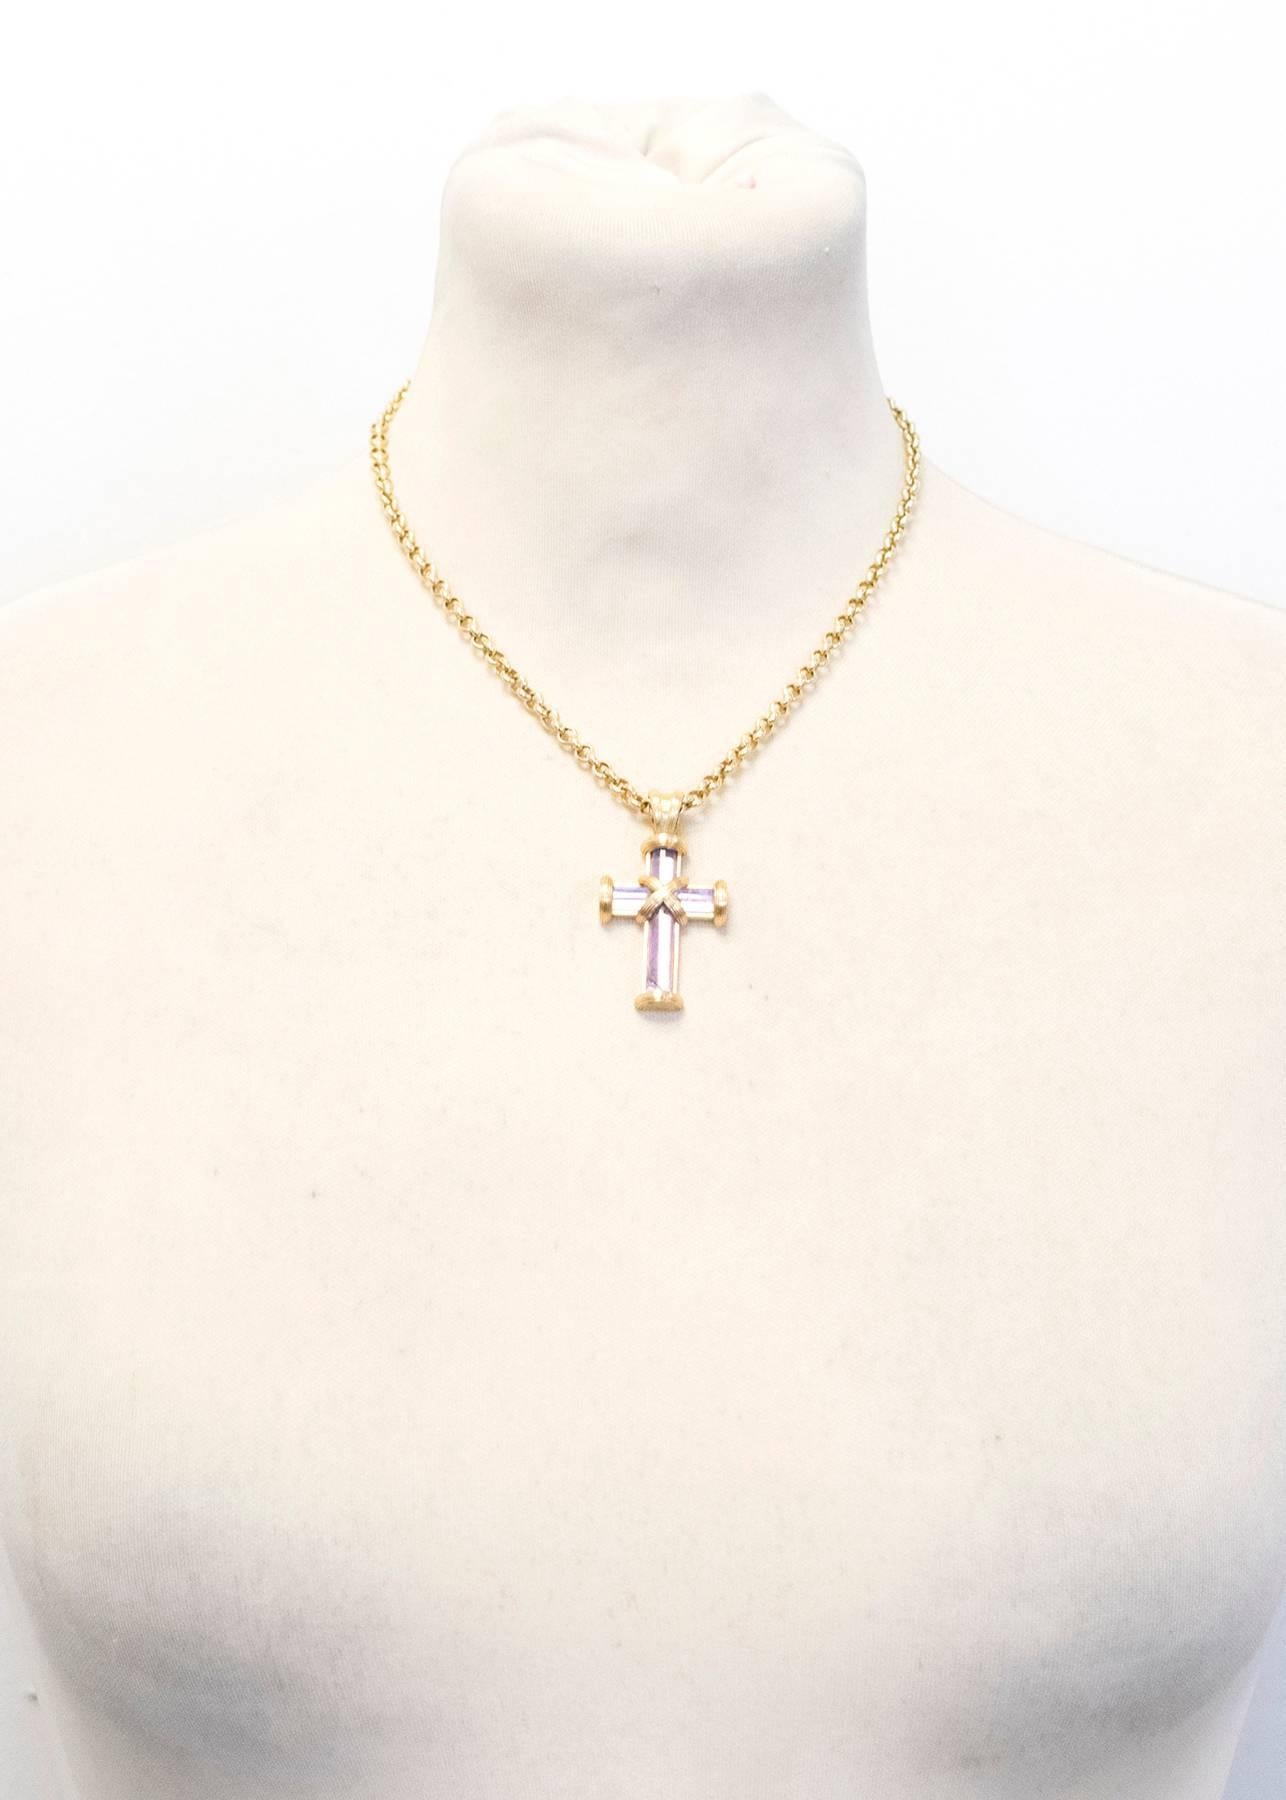 Theo Fennell Gold and Amethyst Cross For Sale 4